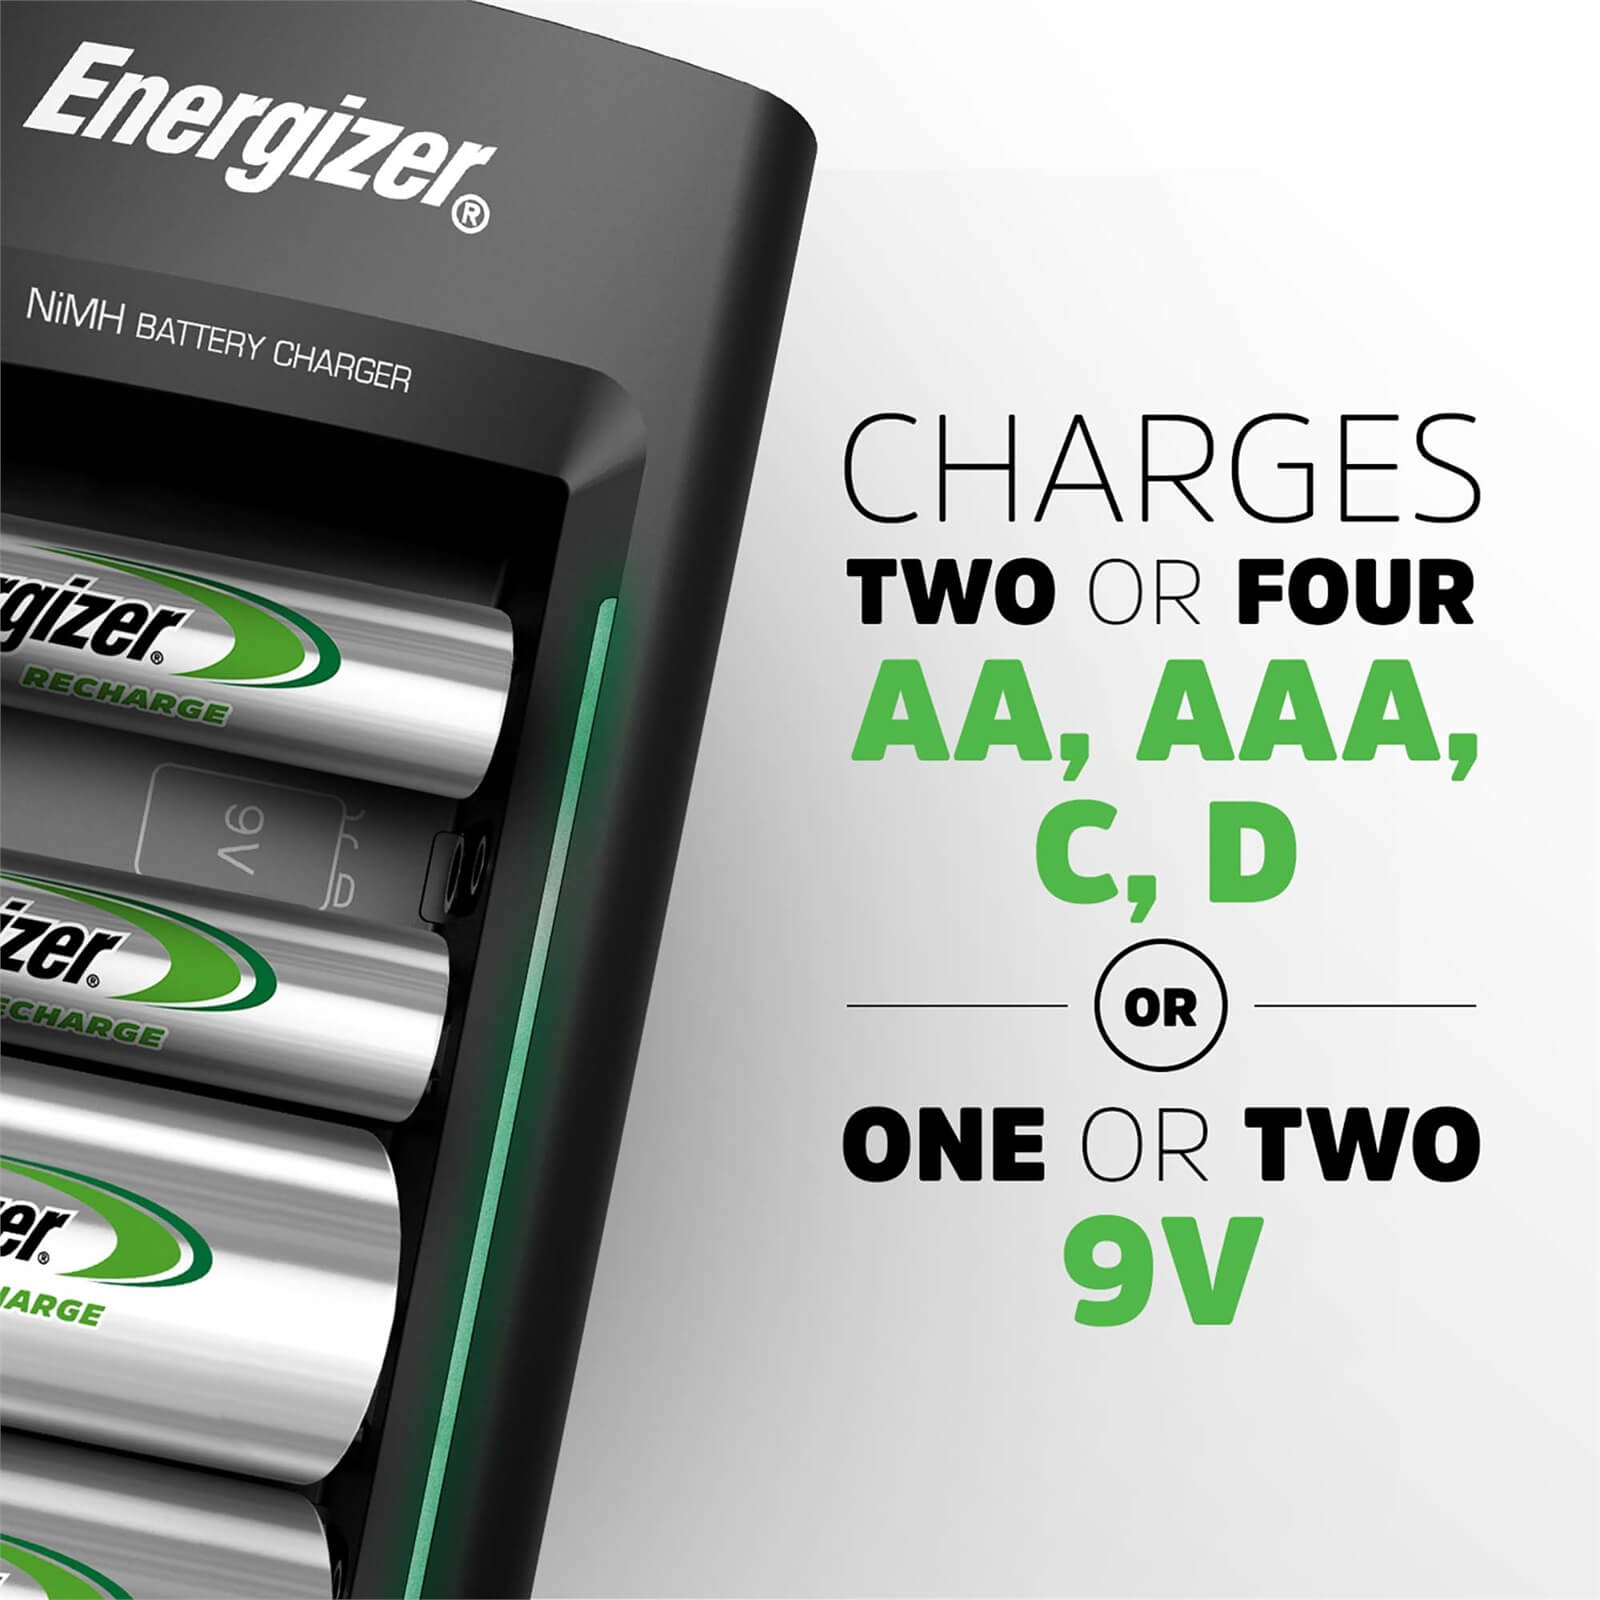 Energizer NiMH Recharge Universal Battery Charger